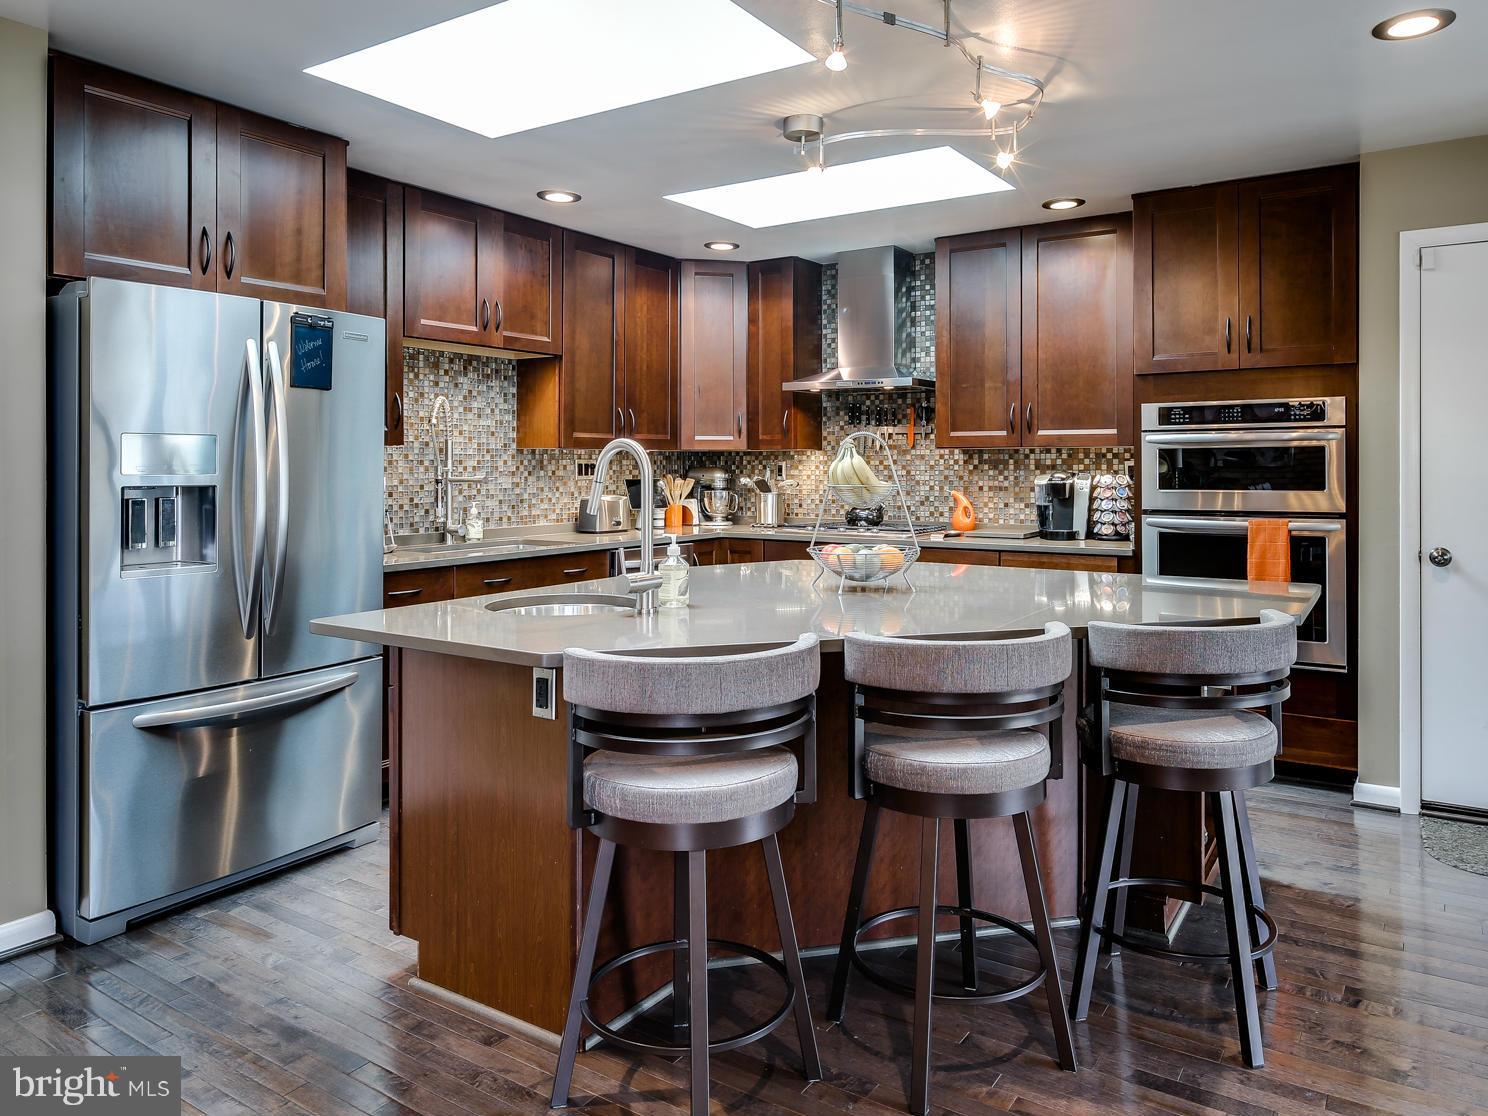 a kitchen with stainless steel appliances kitchen island granite countertop a table chairs refrigerator and cabinets